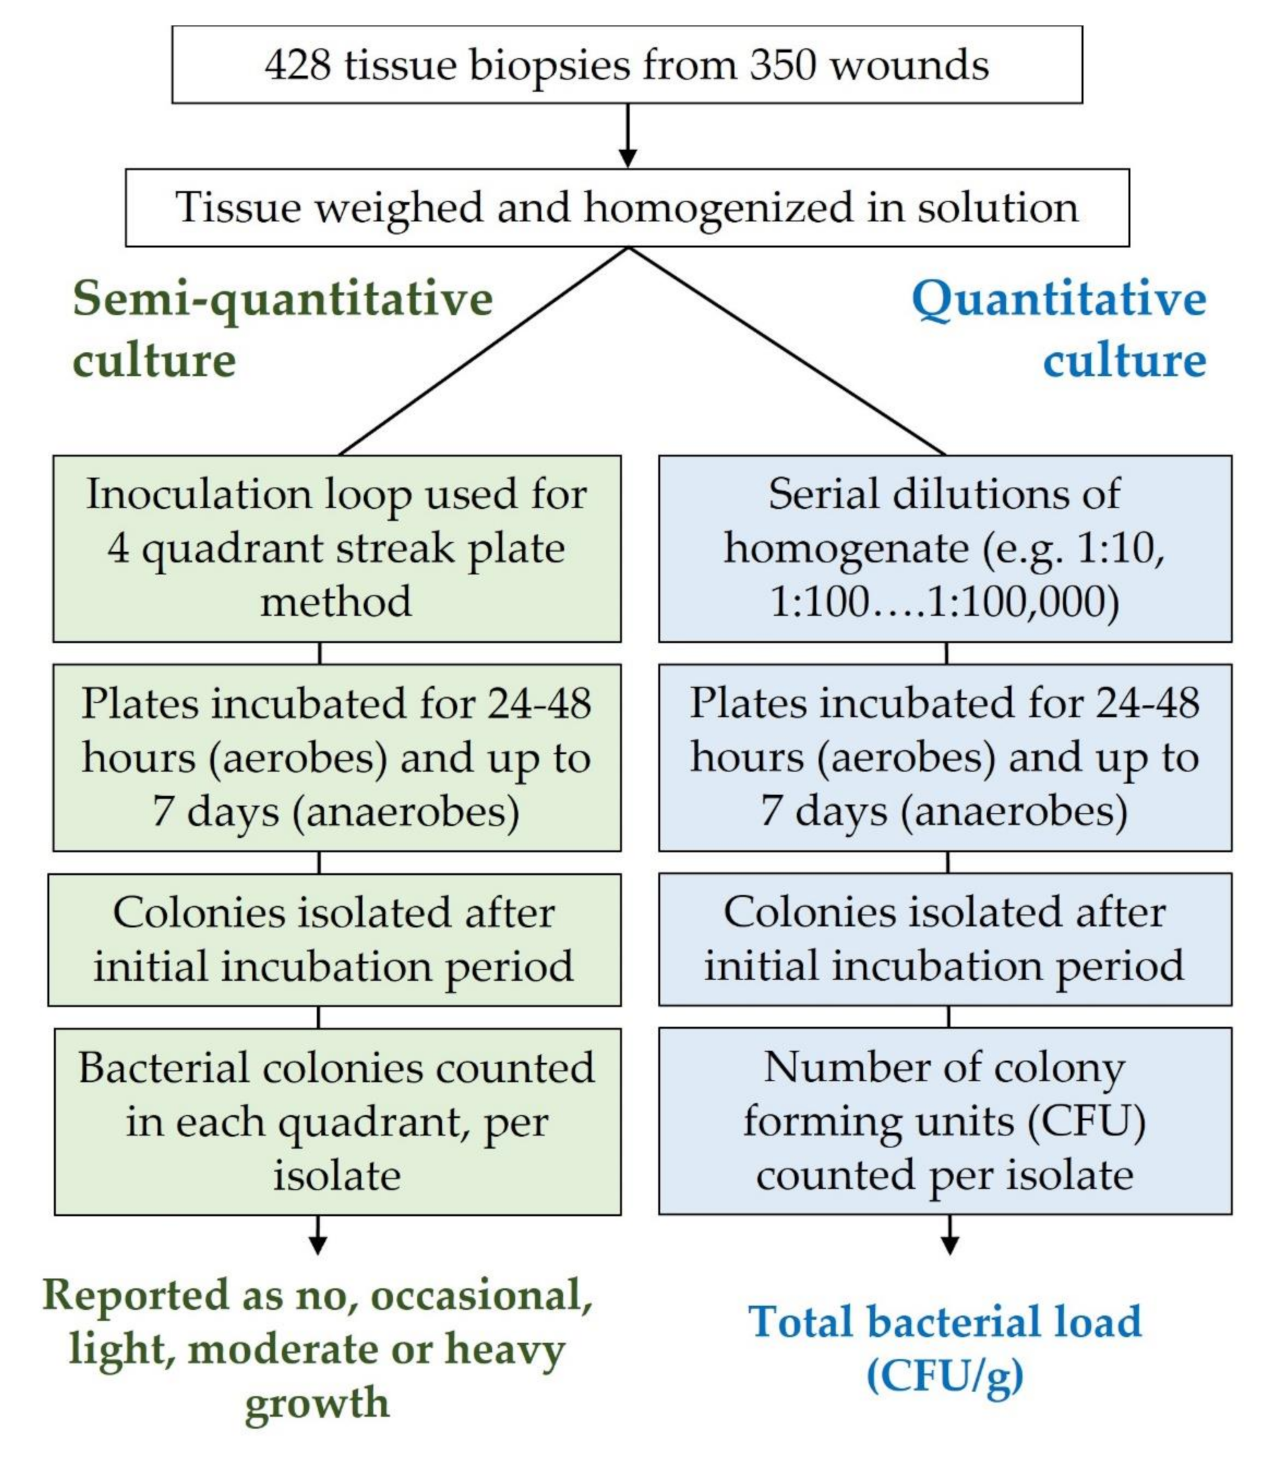 Diagnostics | Free Full-Text | Are Semi-Quantitative Clinical Cultures  Inadequate? Comparison to Quantitative Analysis of 1053 Bacterial Isolates  from 350 Wounds